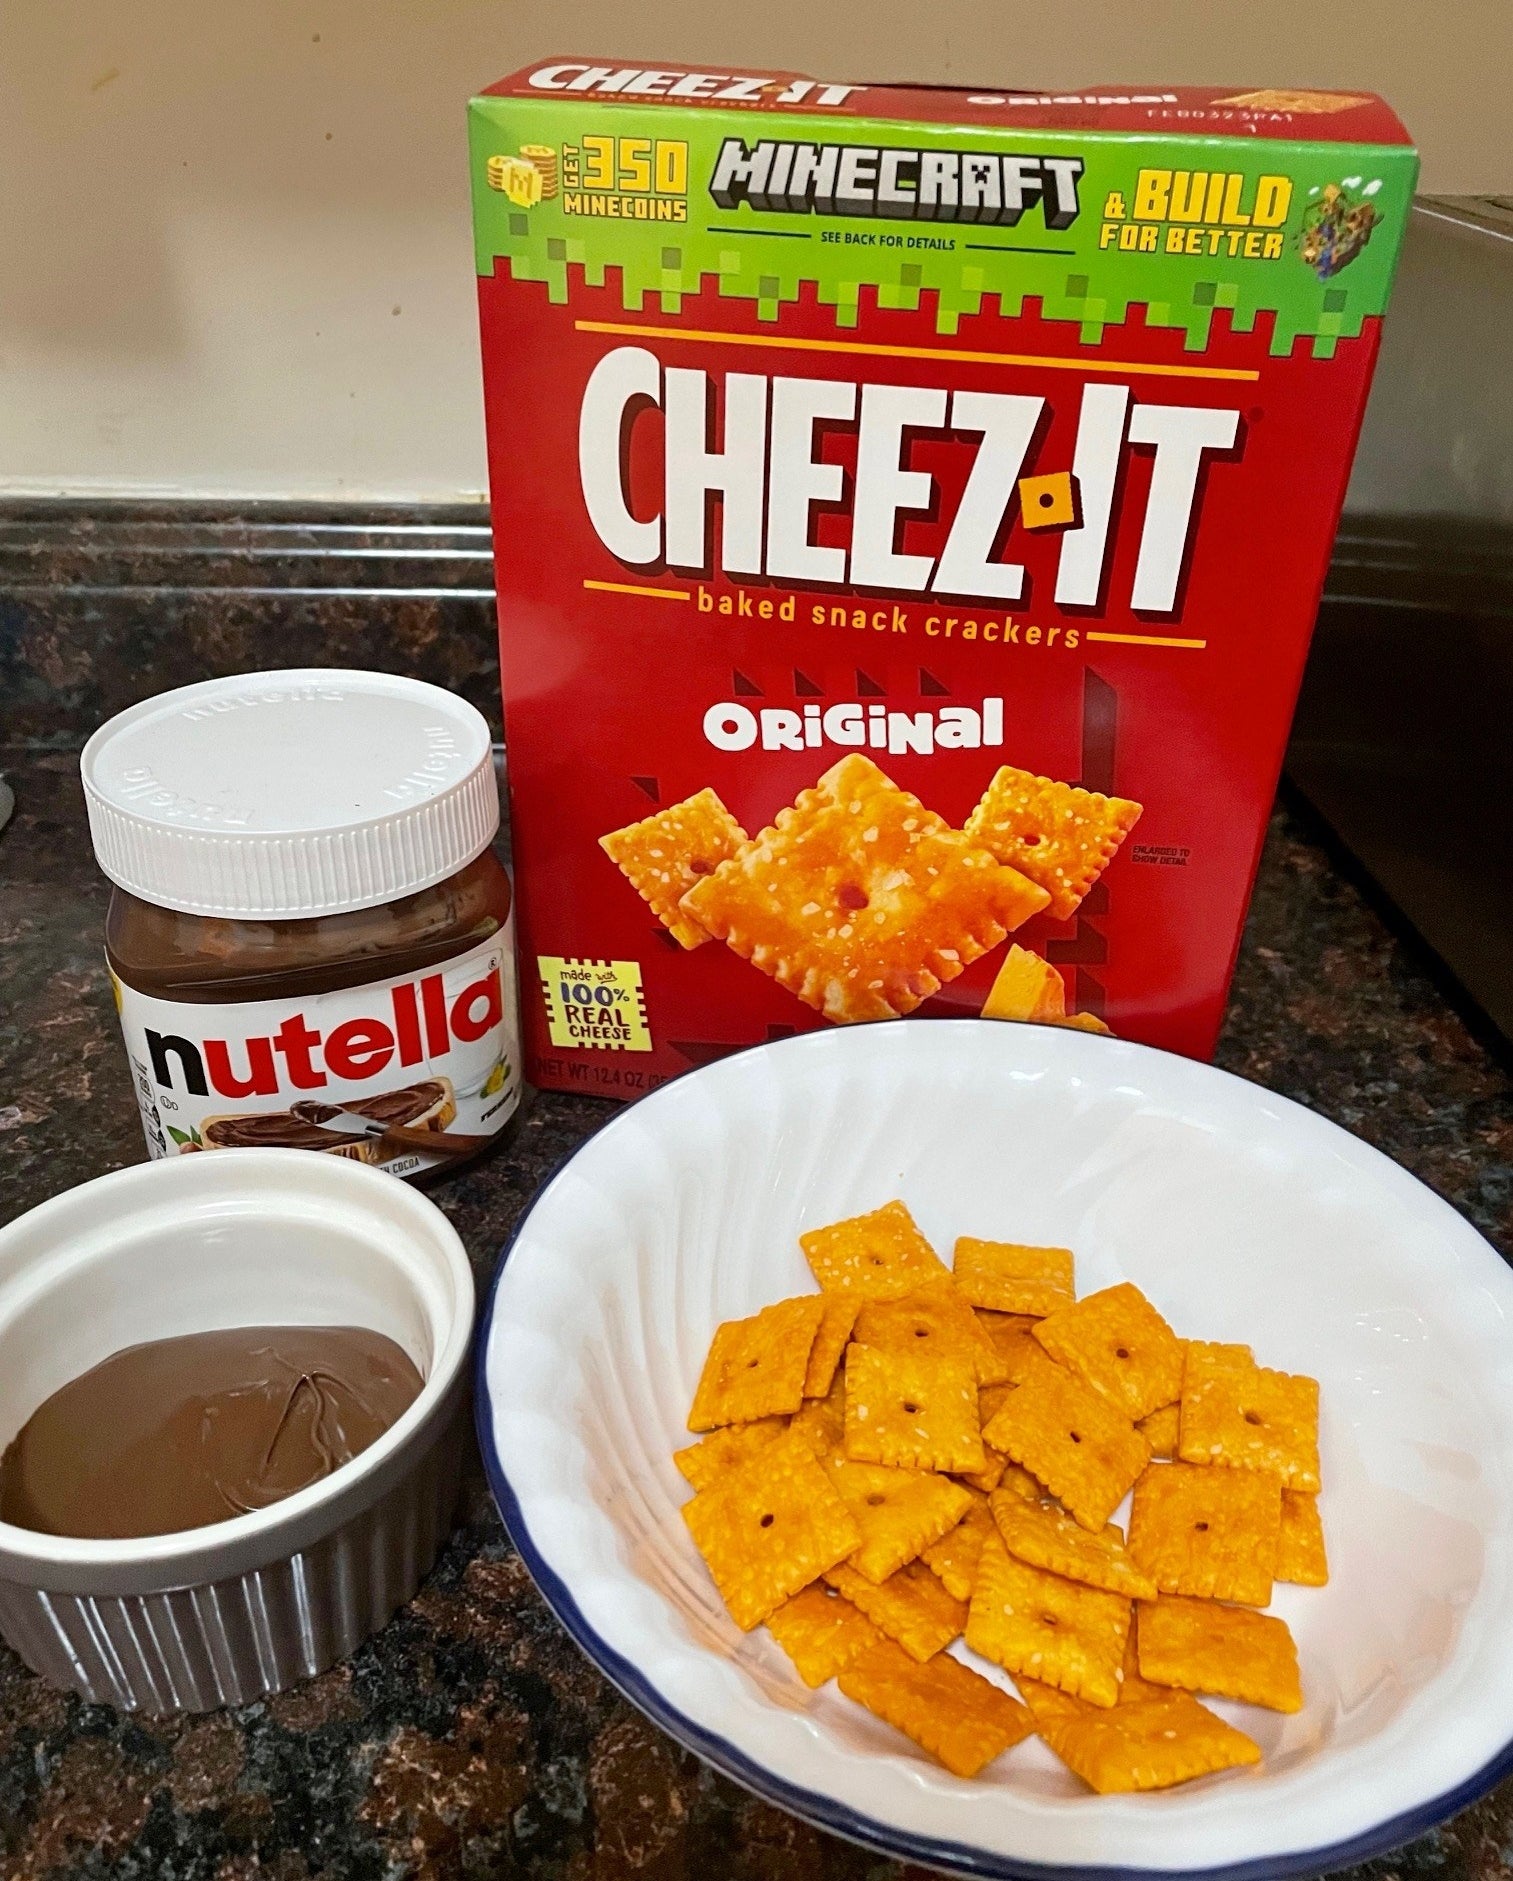 Nutella and Cheez-its